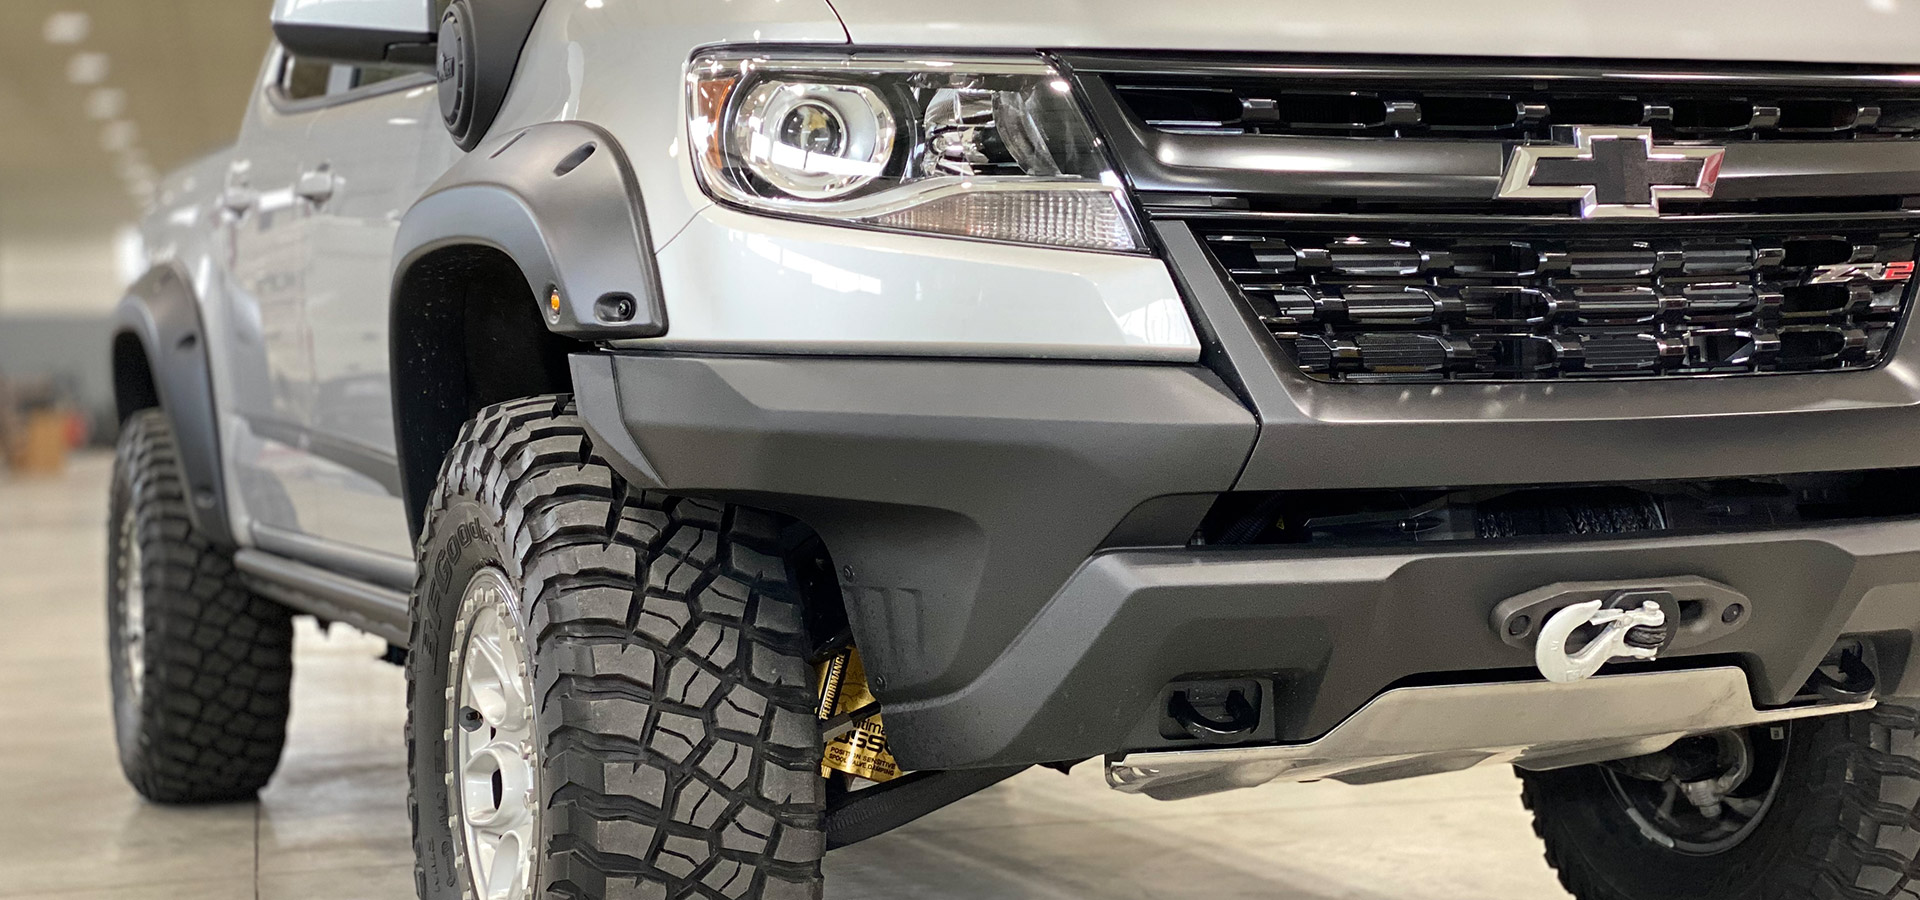 Colorado Front HighMark Flare Kit - - Expedition - Vehicles American ZR2 AEV 2020 - 2017 